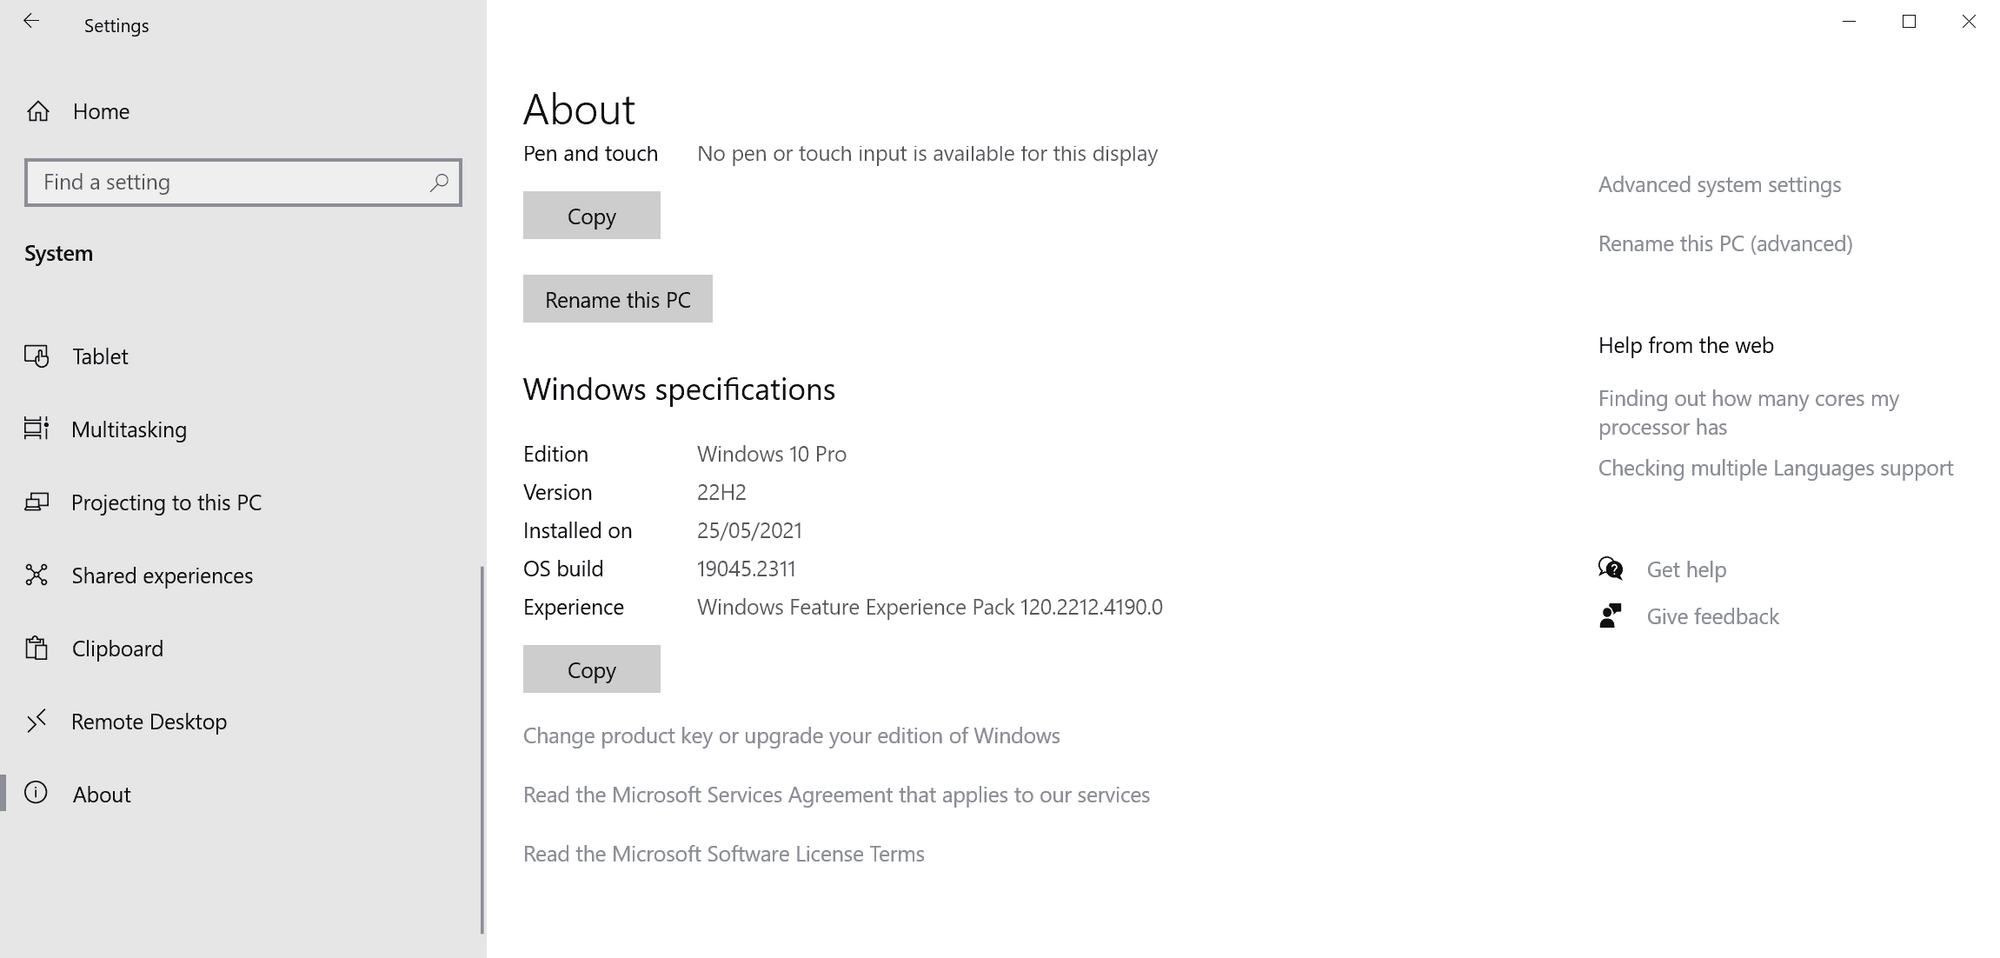 Will there be another Windows 10 feature update? windows-10-version-22h2-about-support-1.png